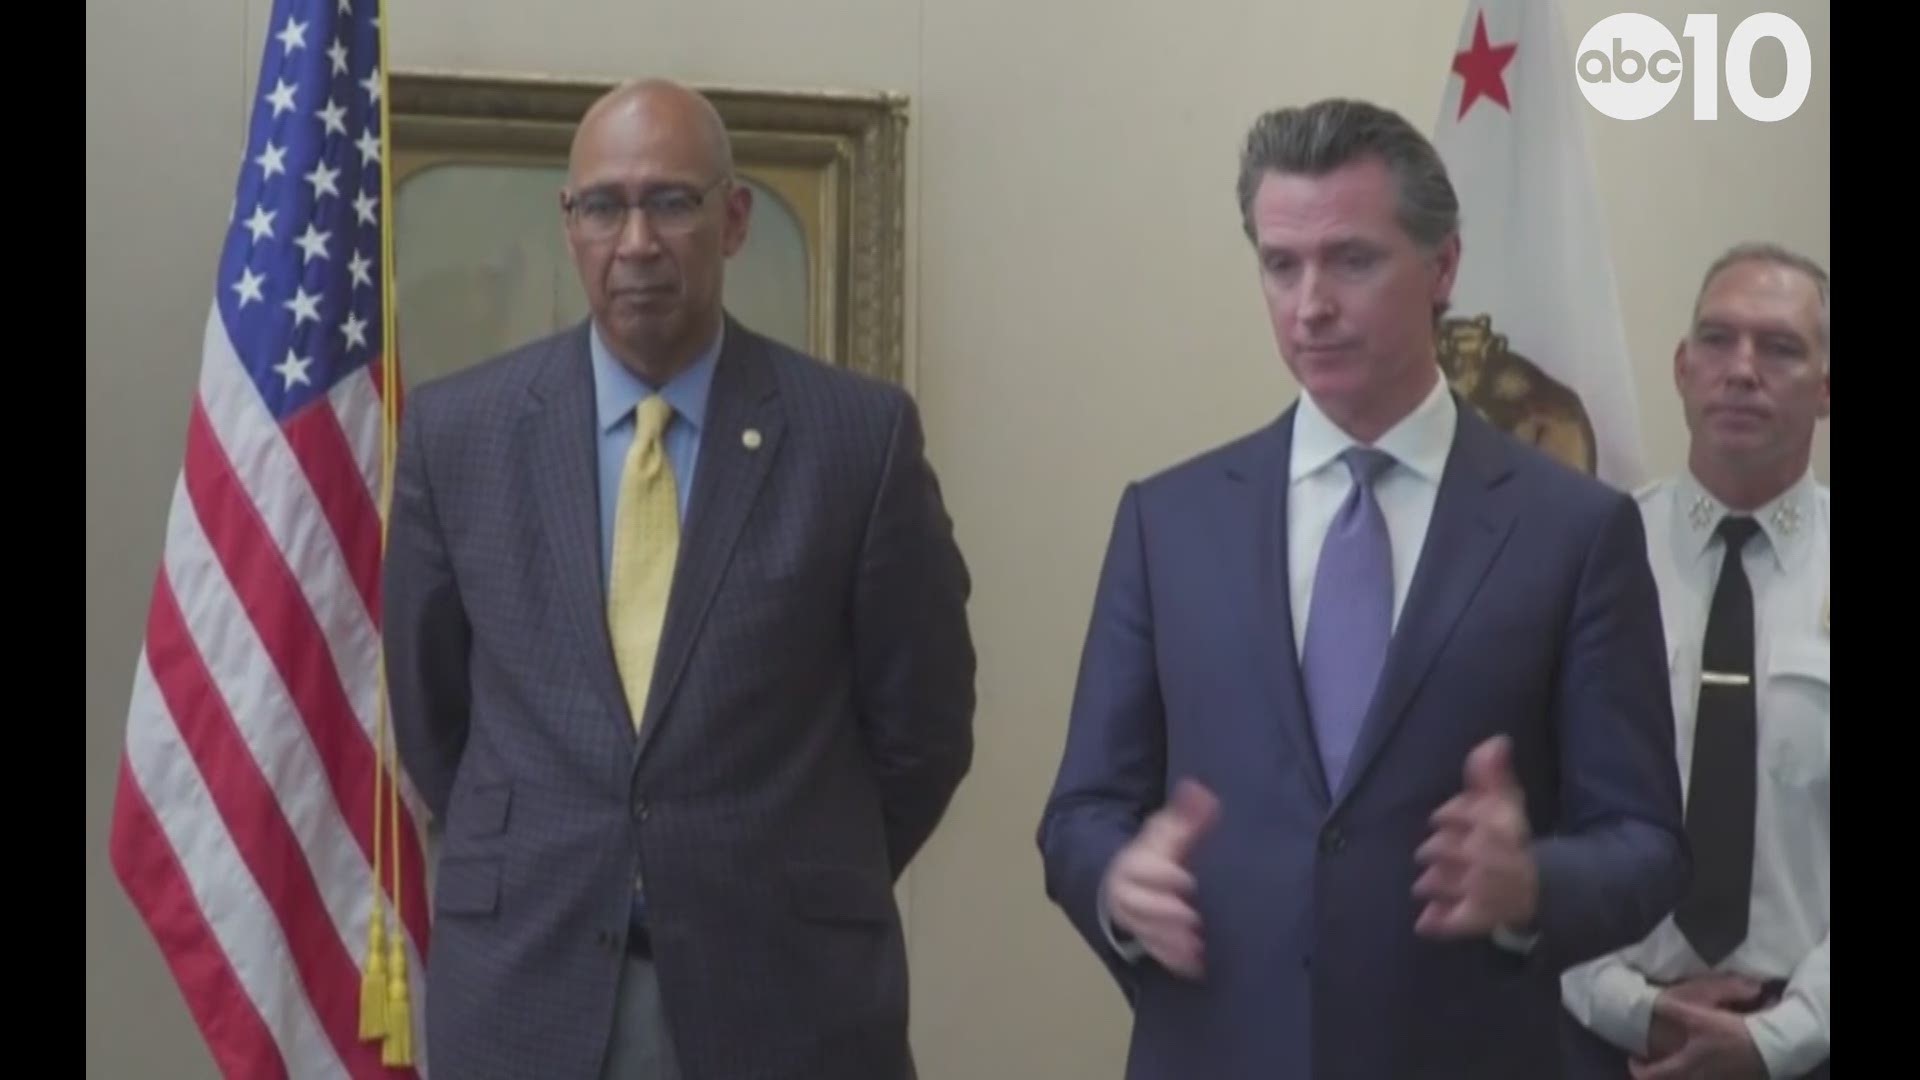 ABC10 asked California Gov. Gavin Newsom for his thoughts on returning PG&E's political donations the company made while he was running for governor.